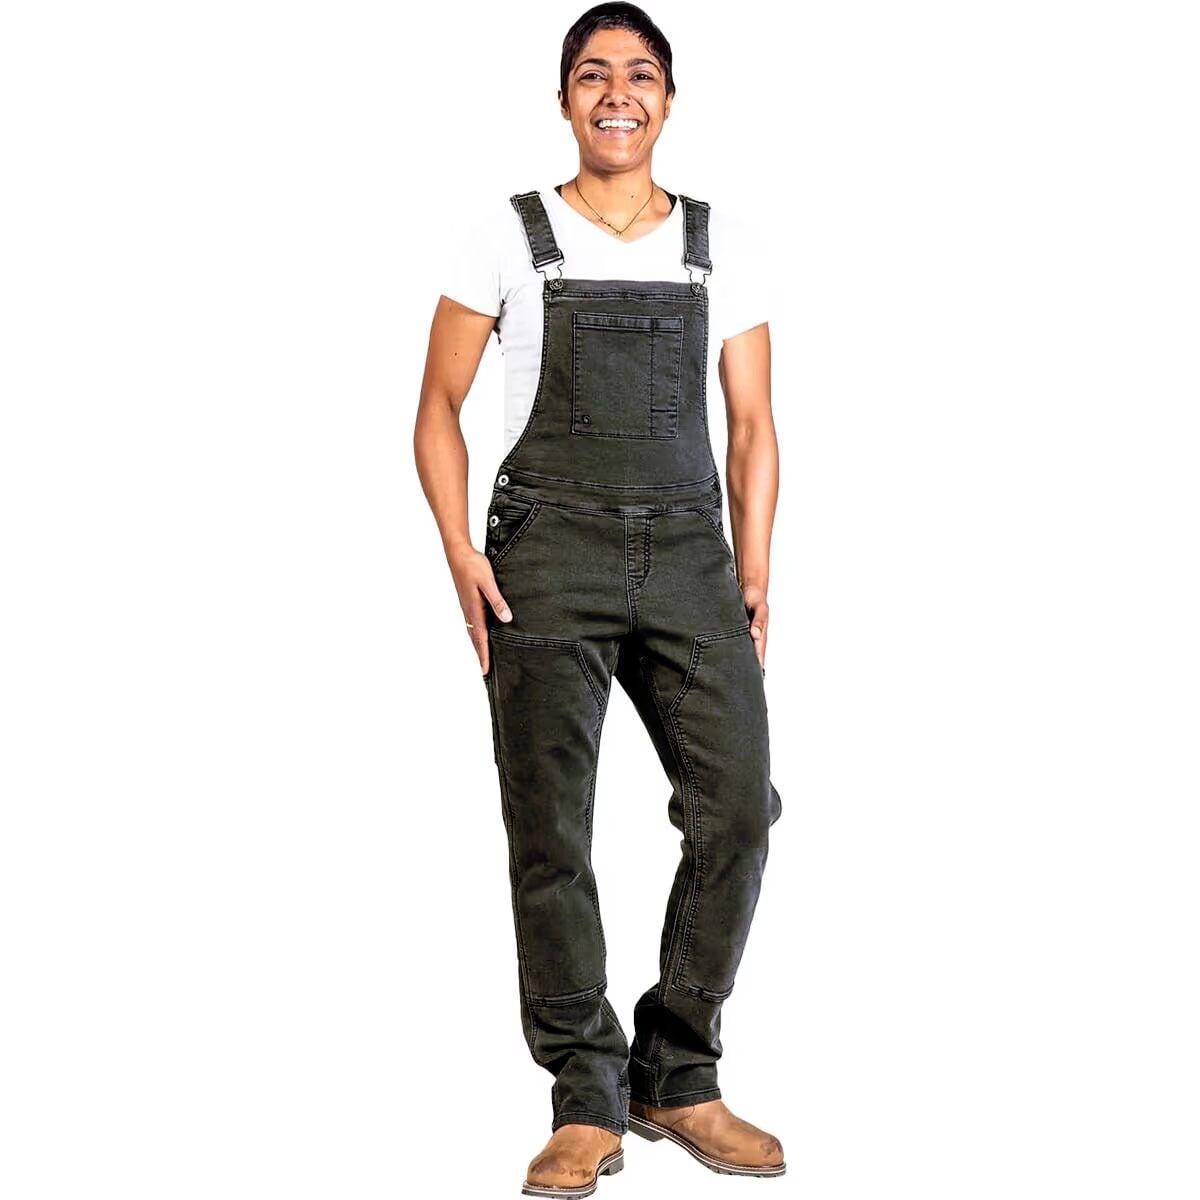 Dovetail Workwear Freshley Thermal Overall - Women's